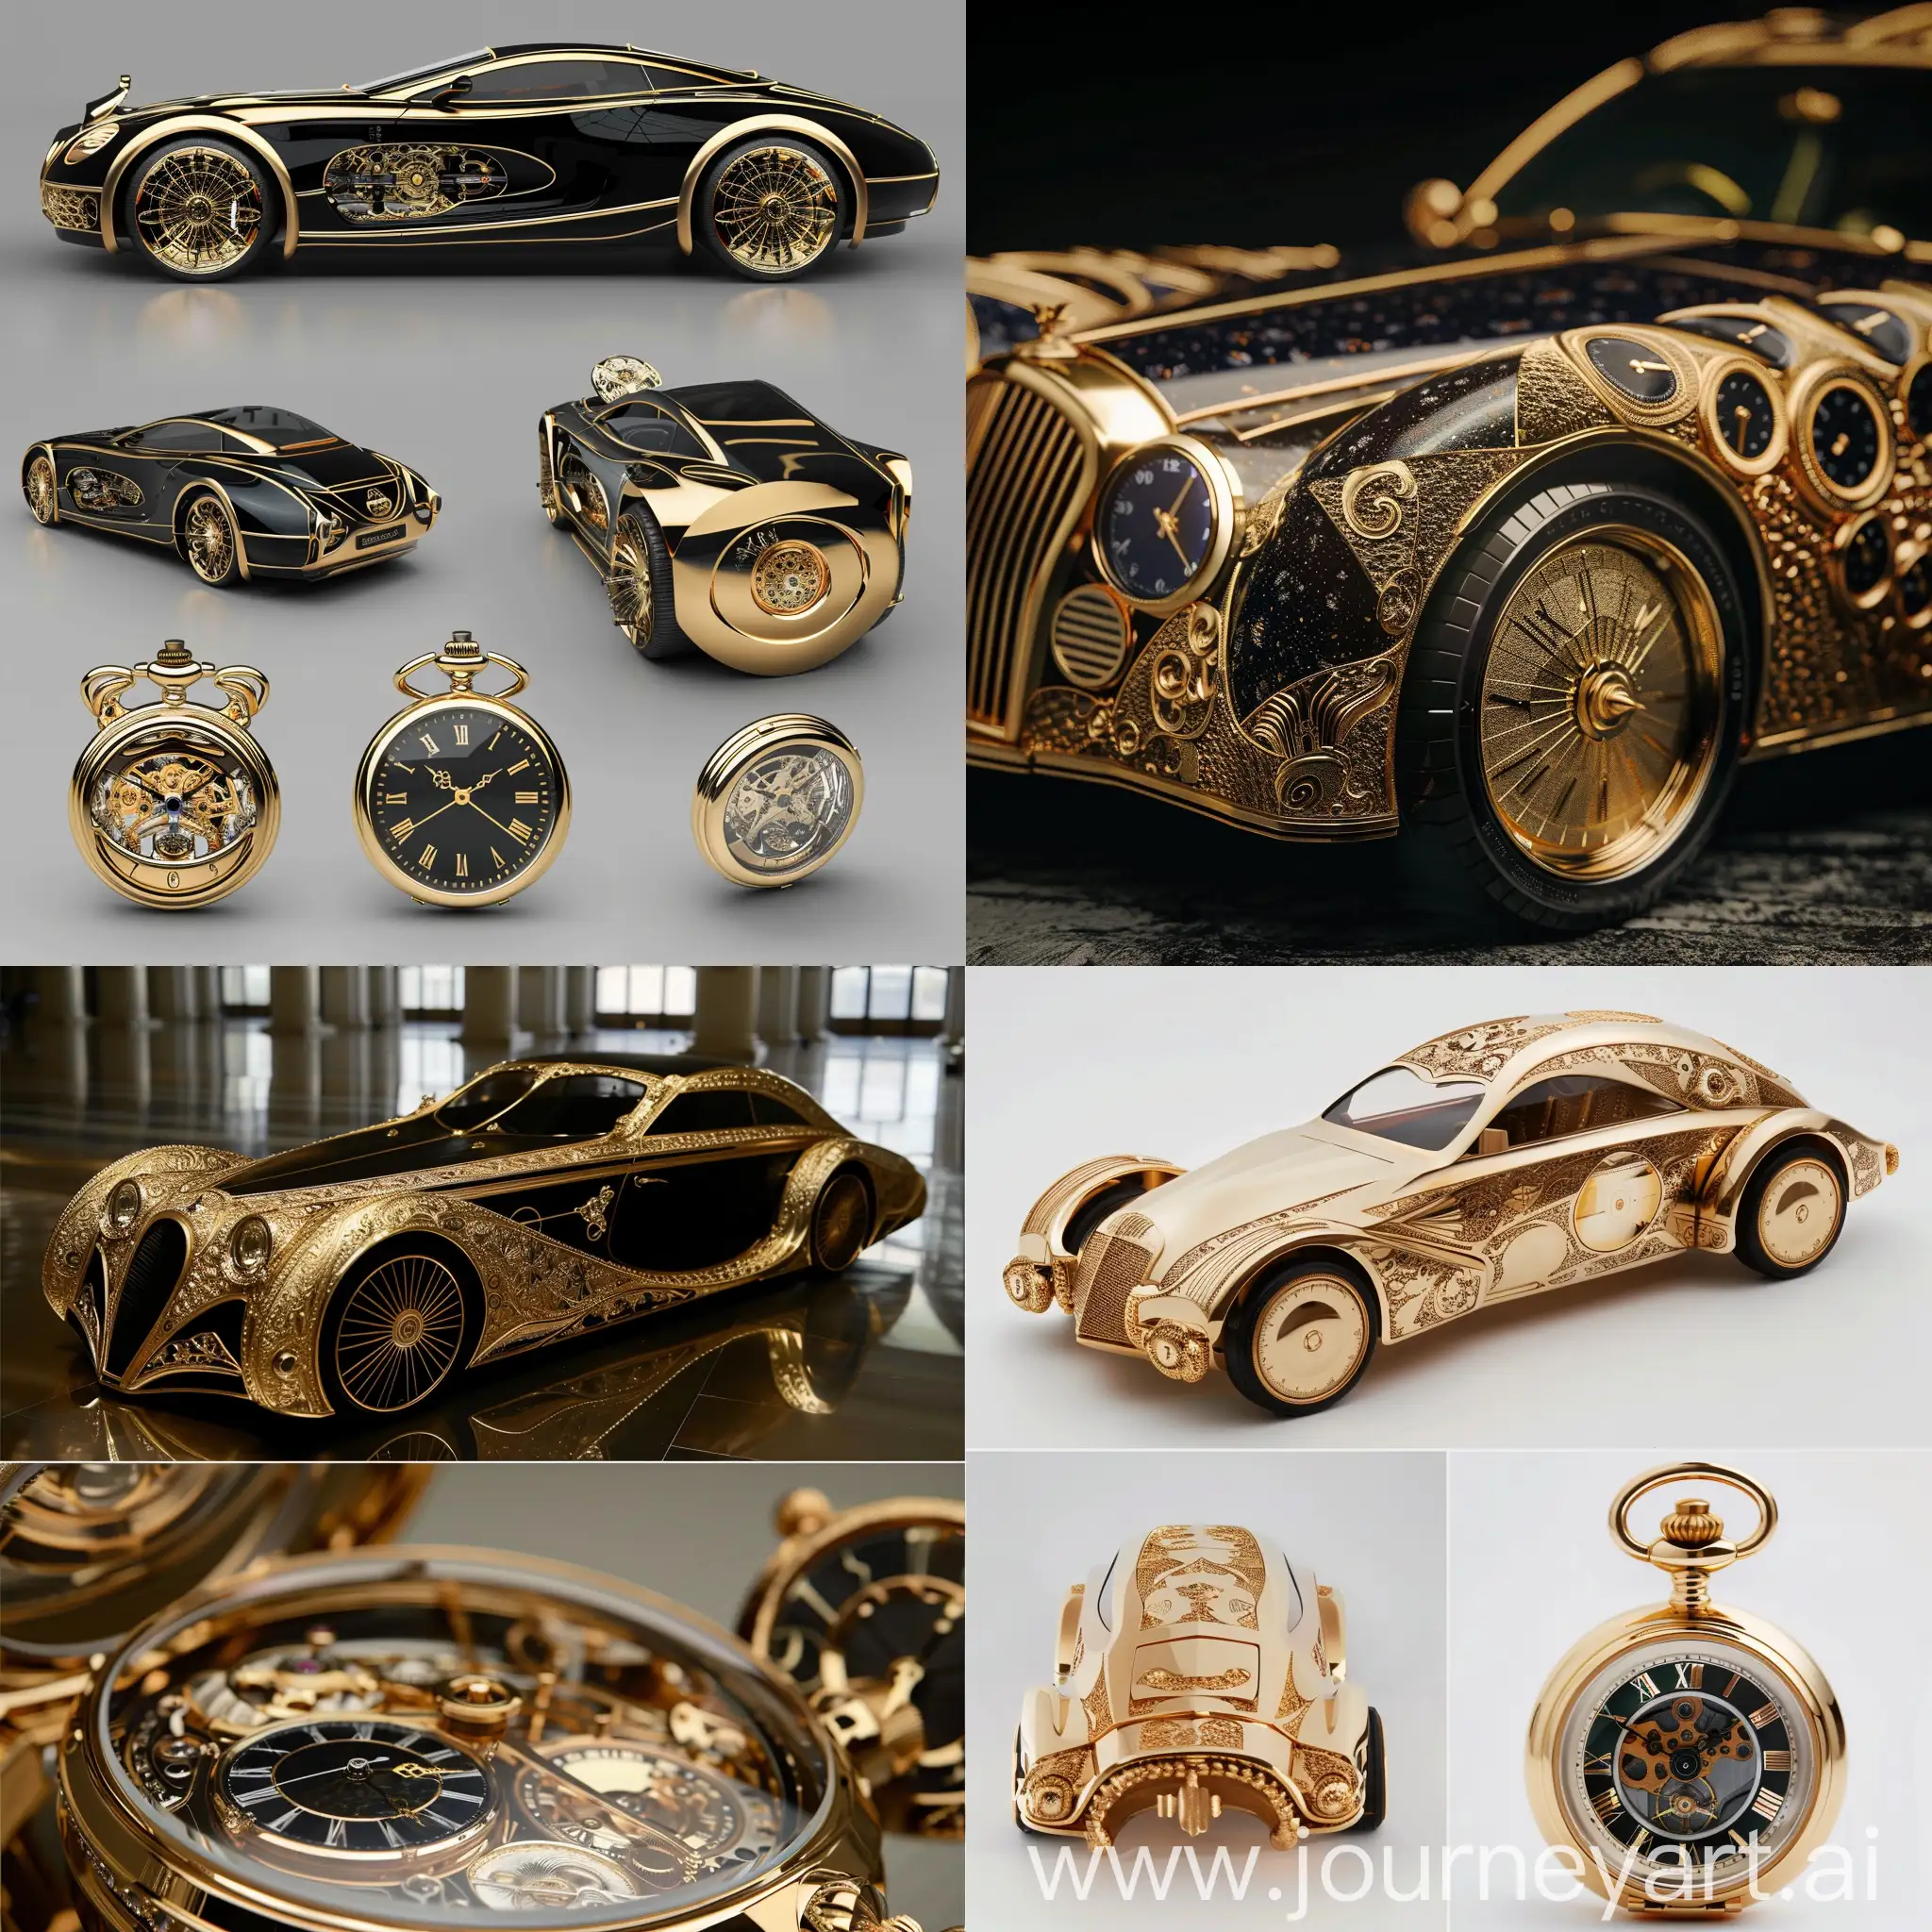 Car design inspired by pocket watches, gold and Beaux-Arts 